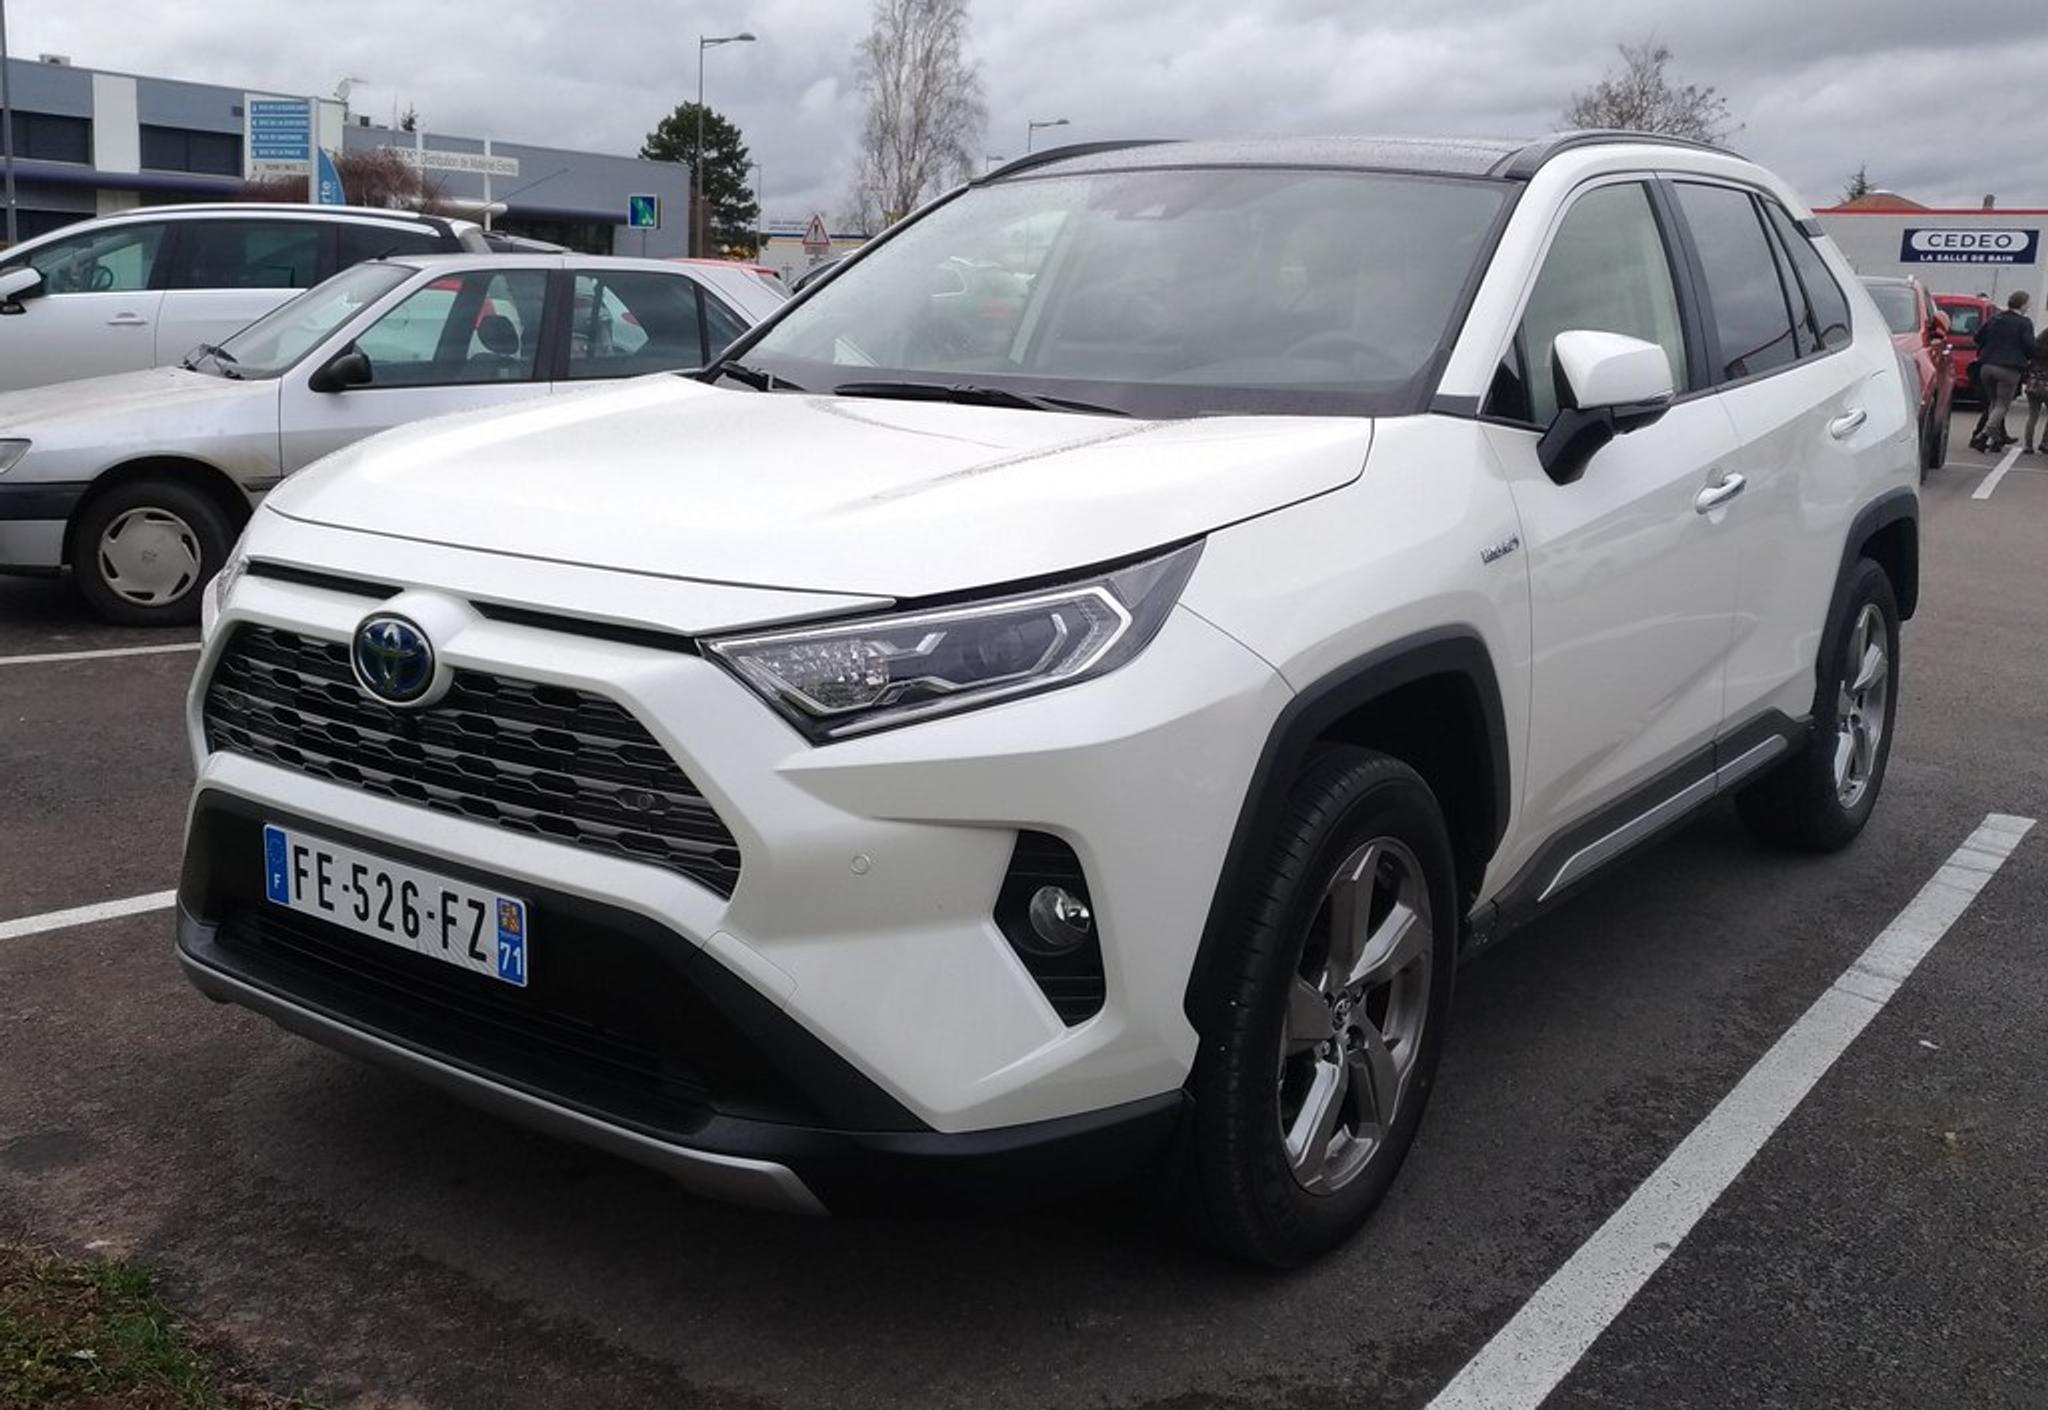 Toyota RAV4 is the most reliable crossover